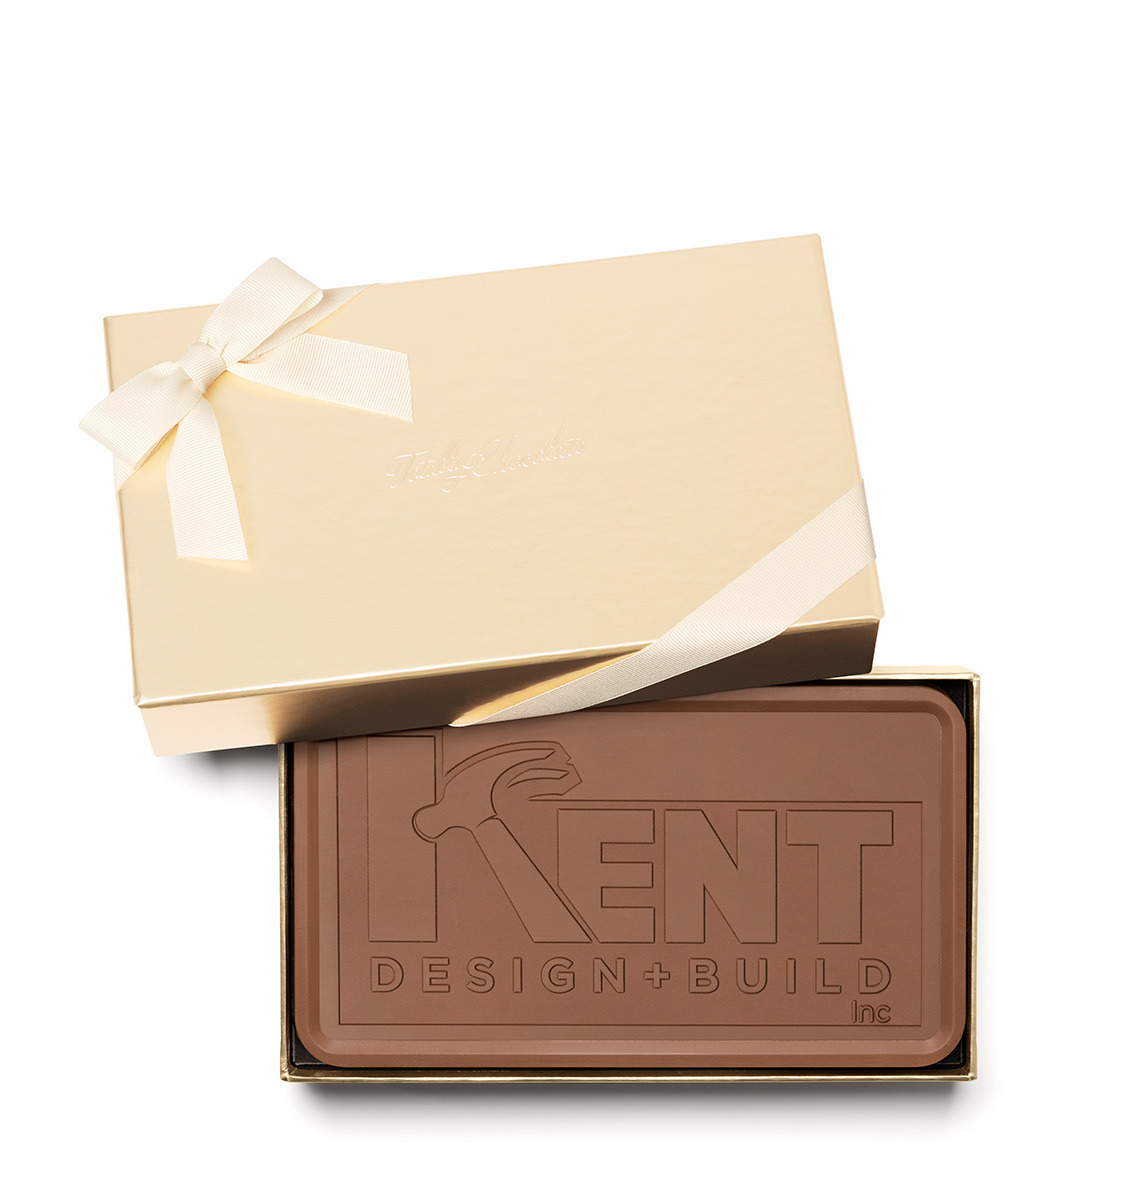 Premium Chocolate Bar (No Toppings) – Top This Chocolate